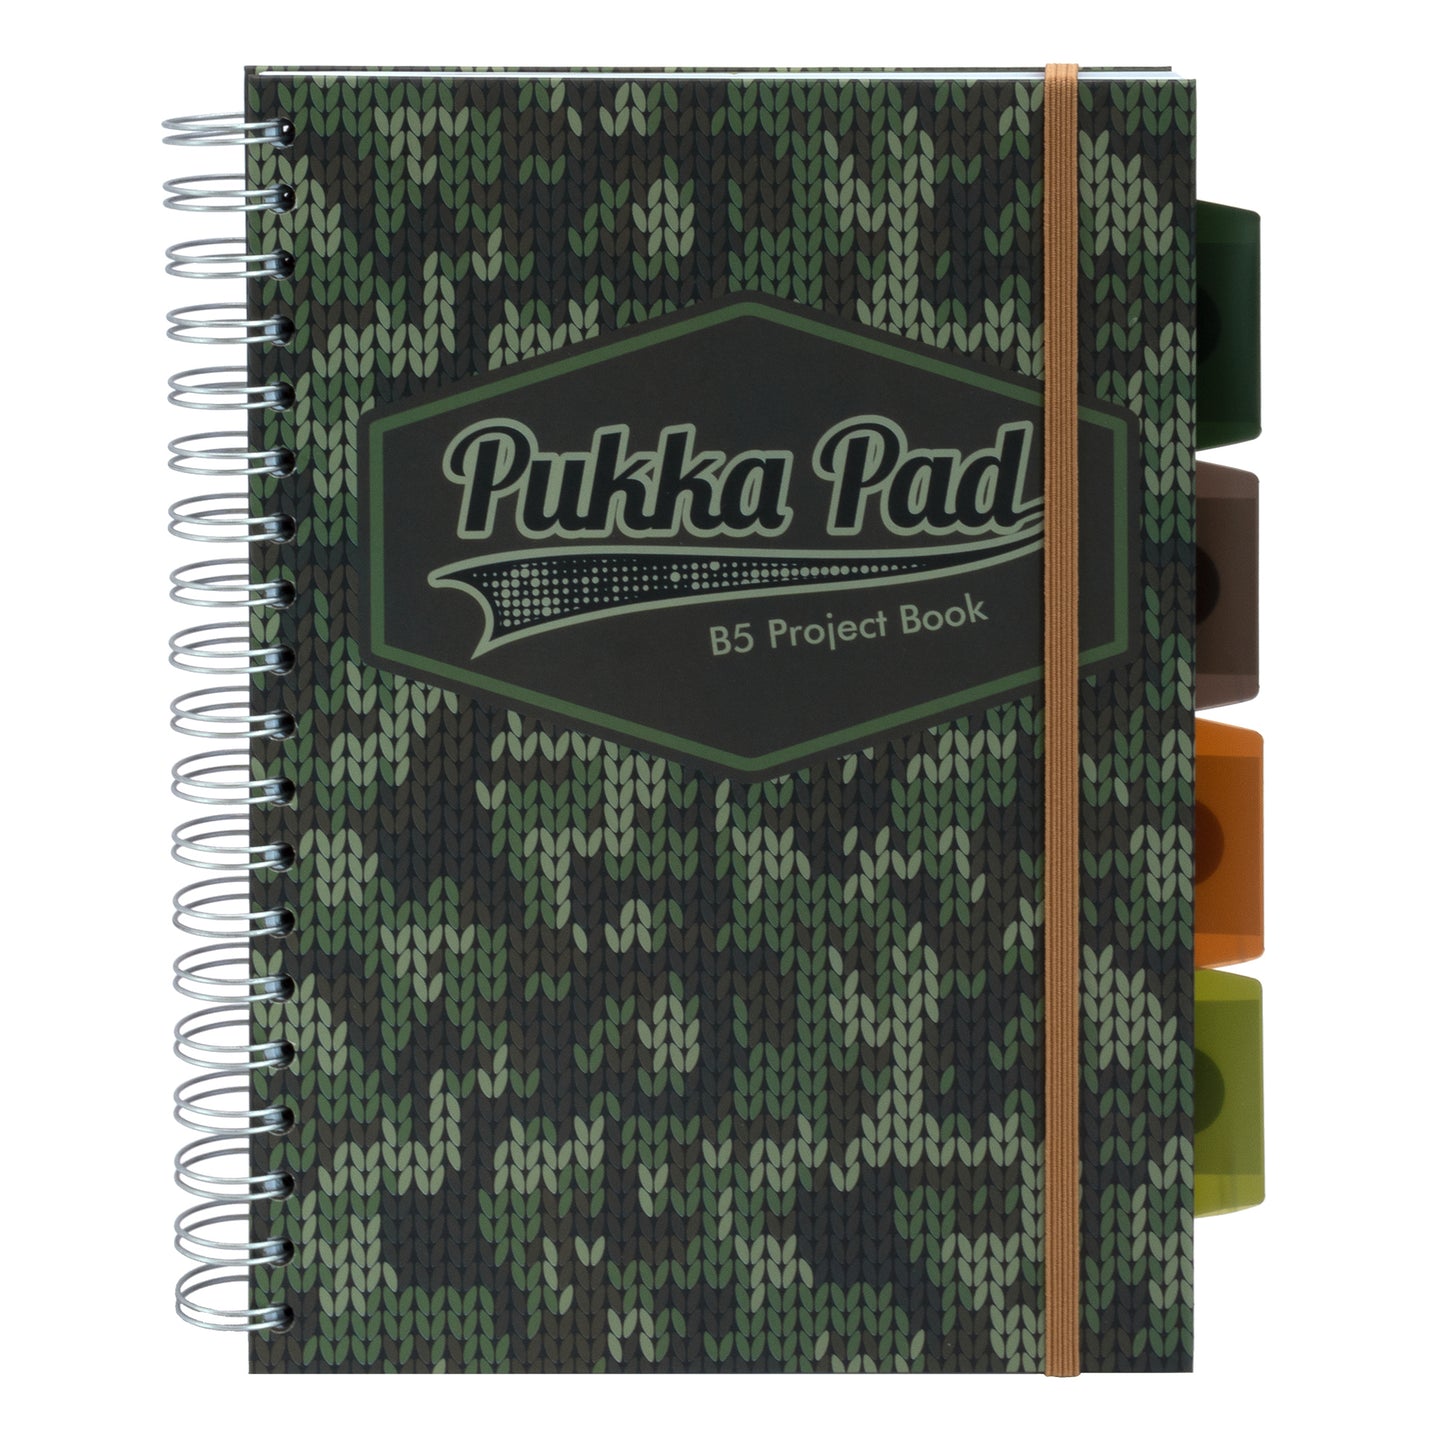 Camo B5 Project Book - Pack 3